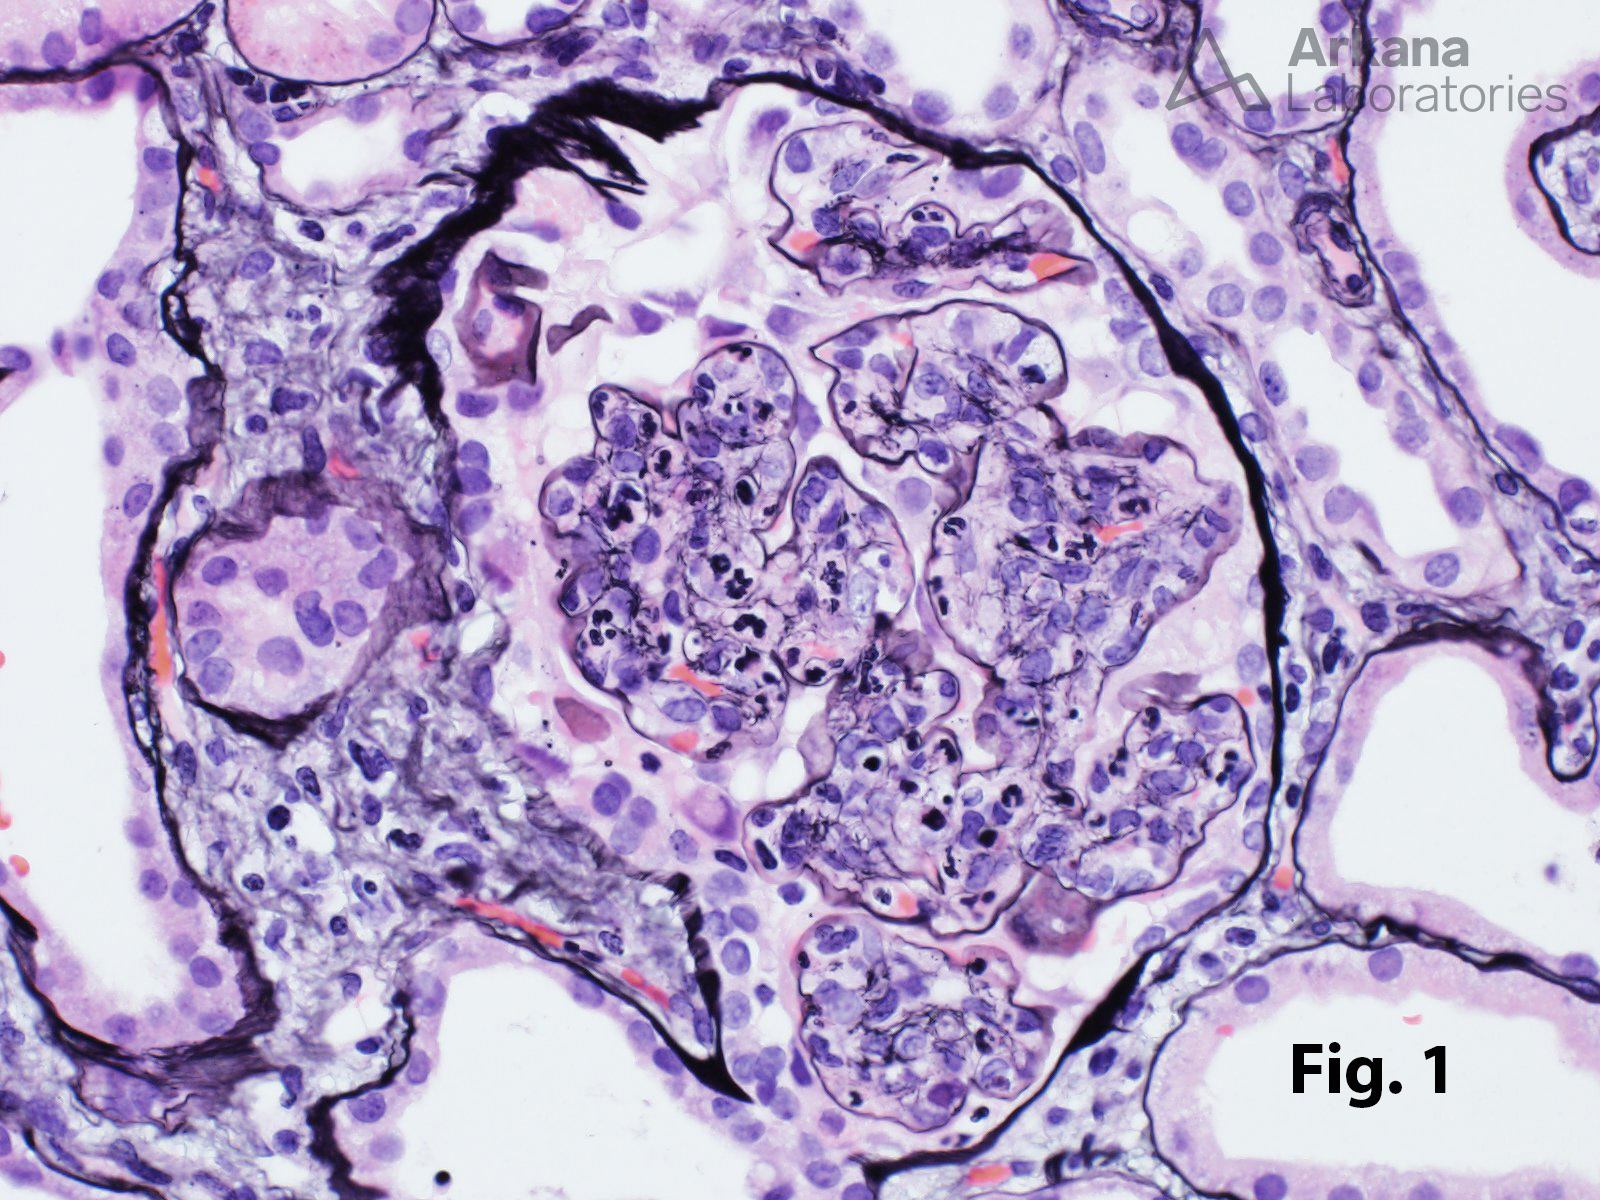 Infection-Associated Glomerulonephritis in renal biopsy